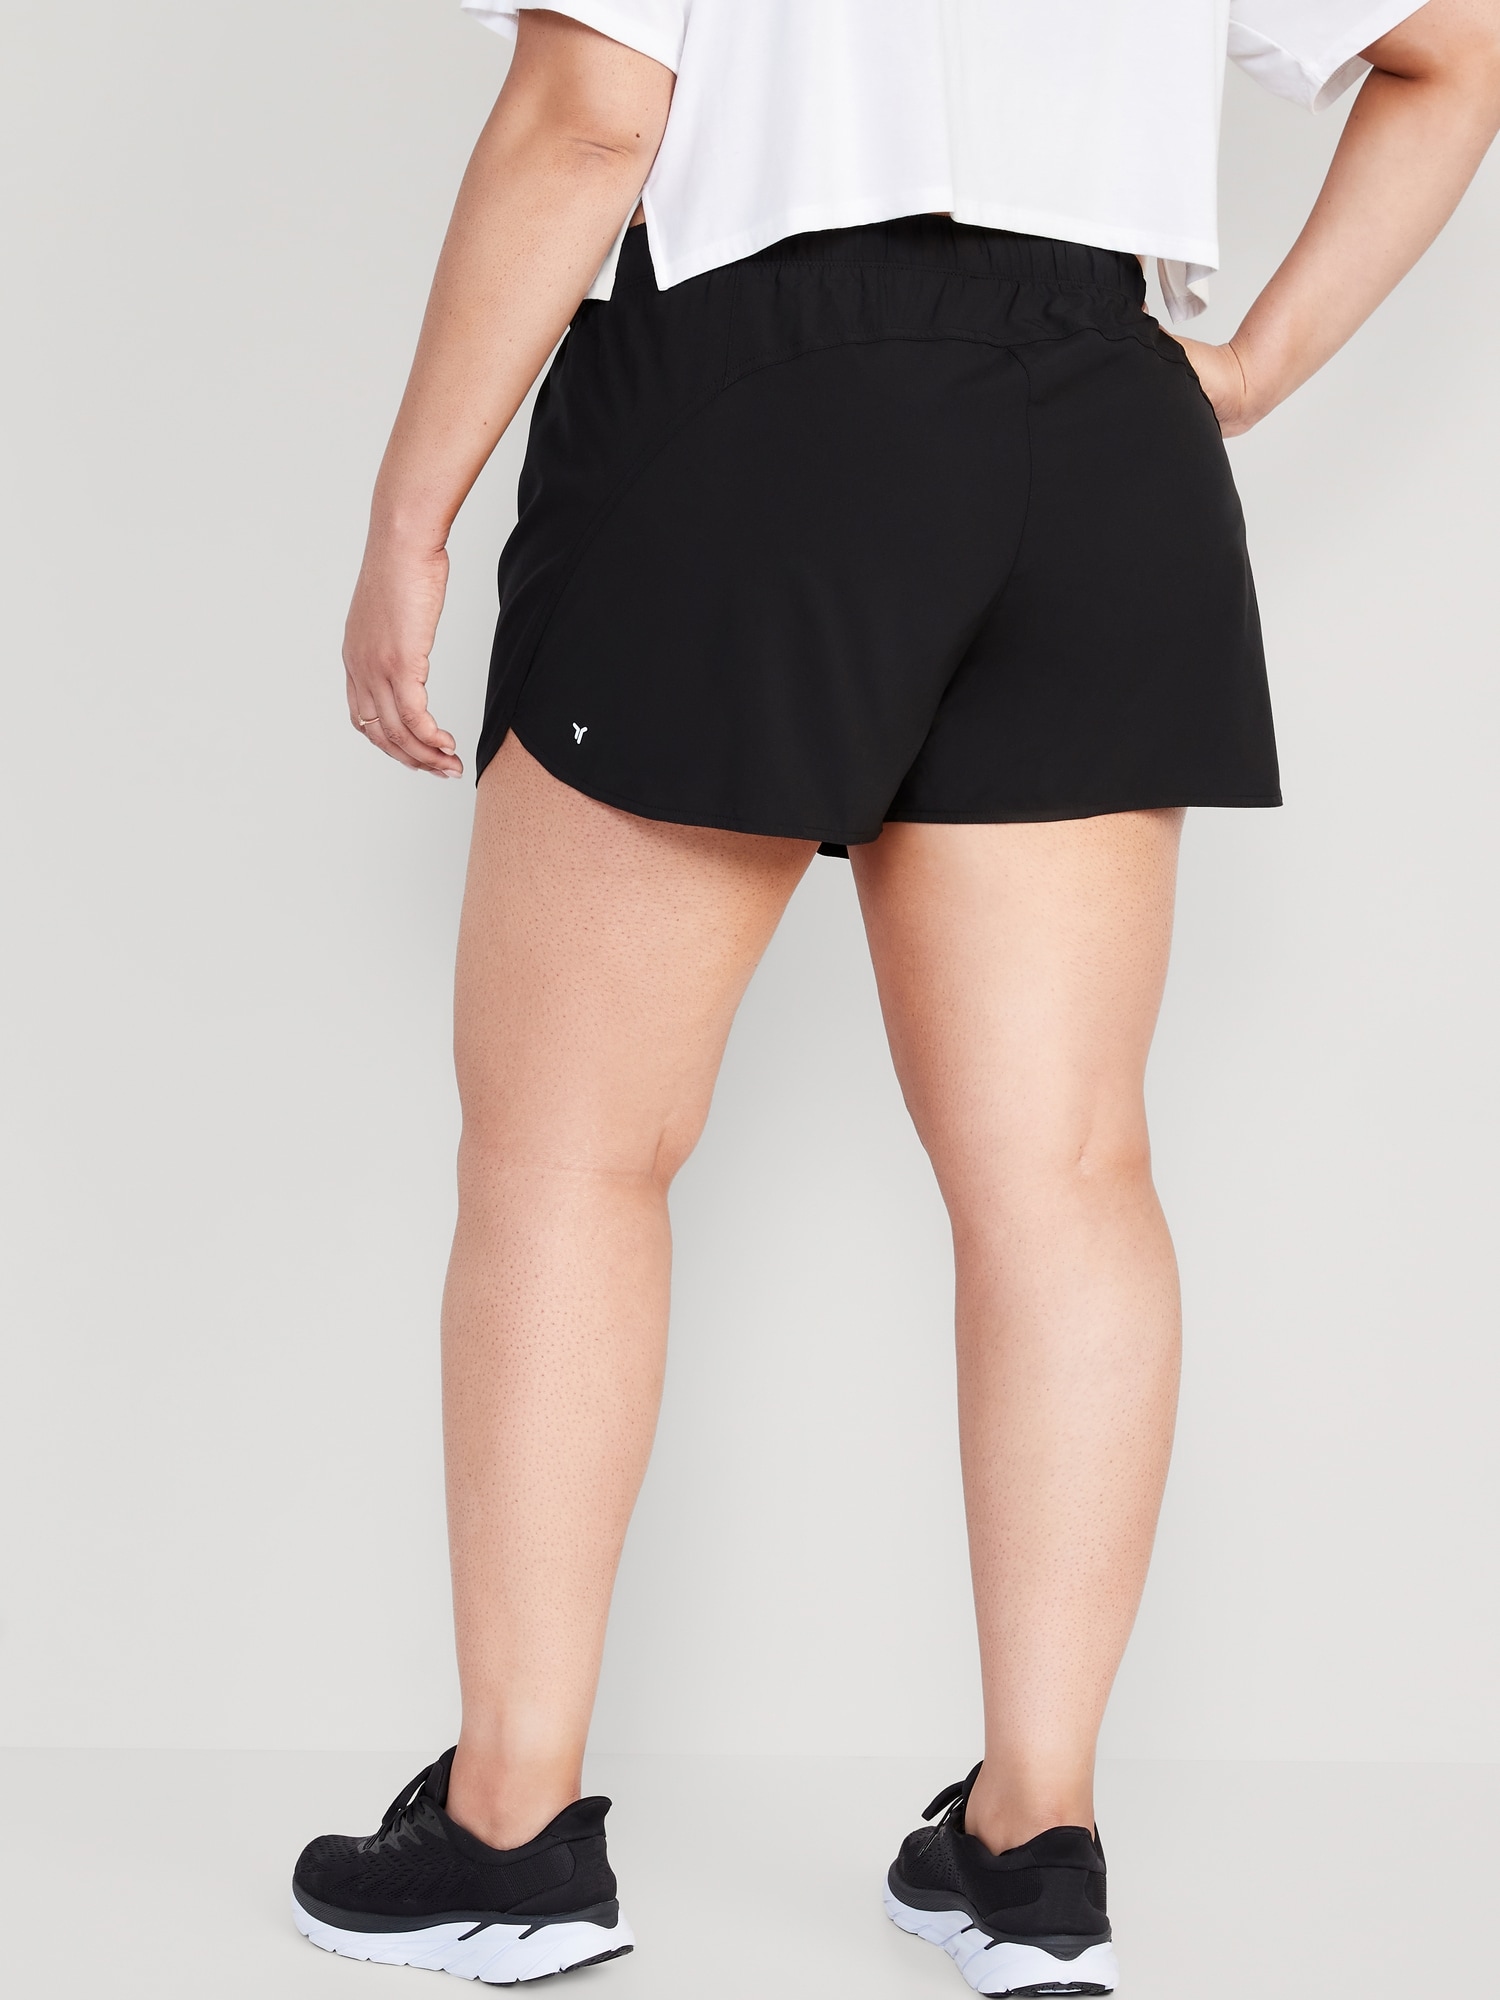 Women's Workout Dolphin Shorts with Pockets and UK